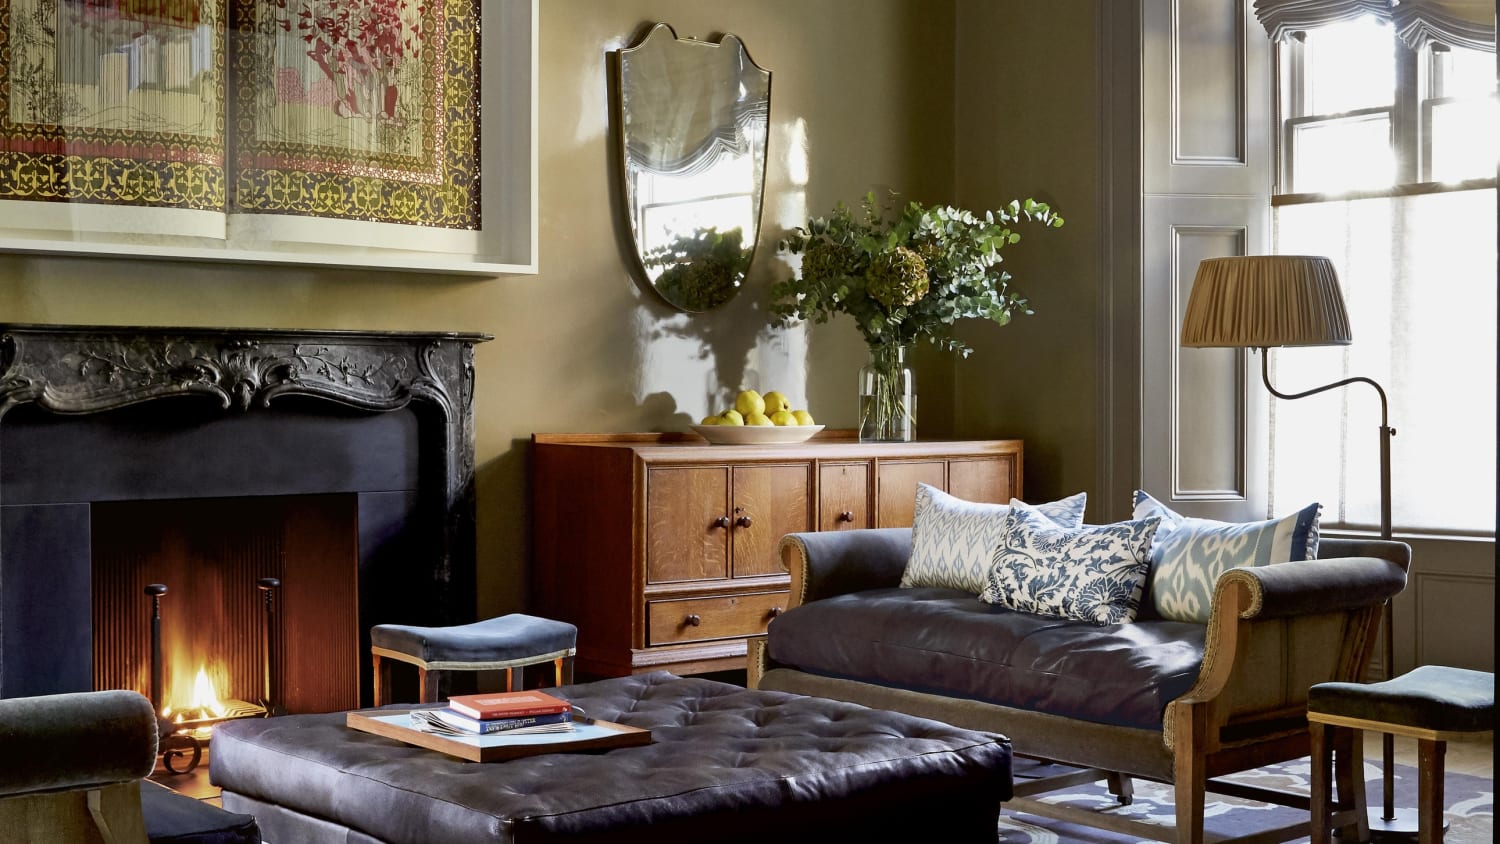 Nicola Harding's atmospheric, characterful design for a London townhouse